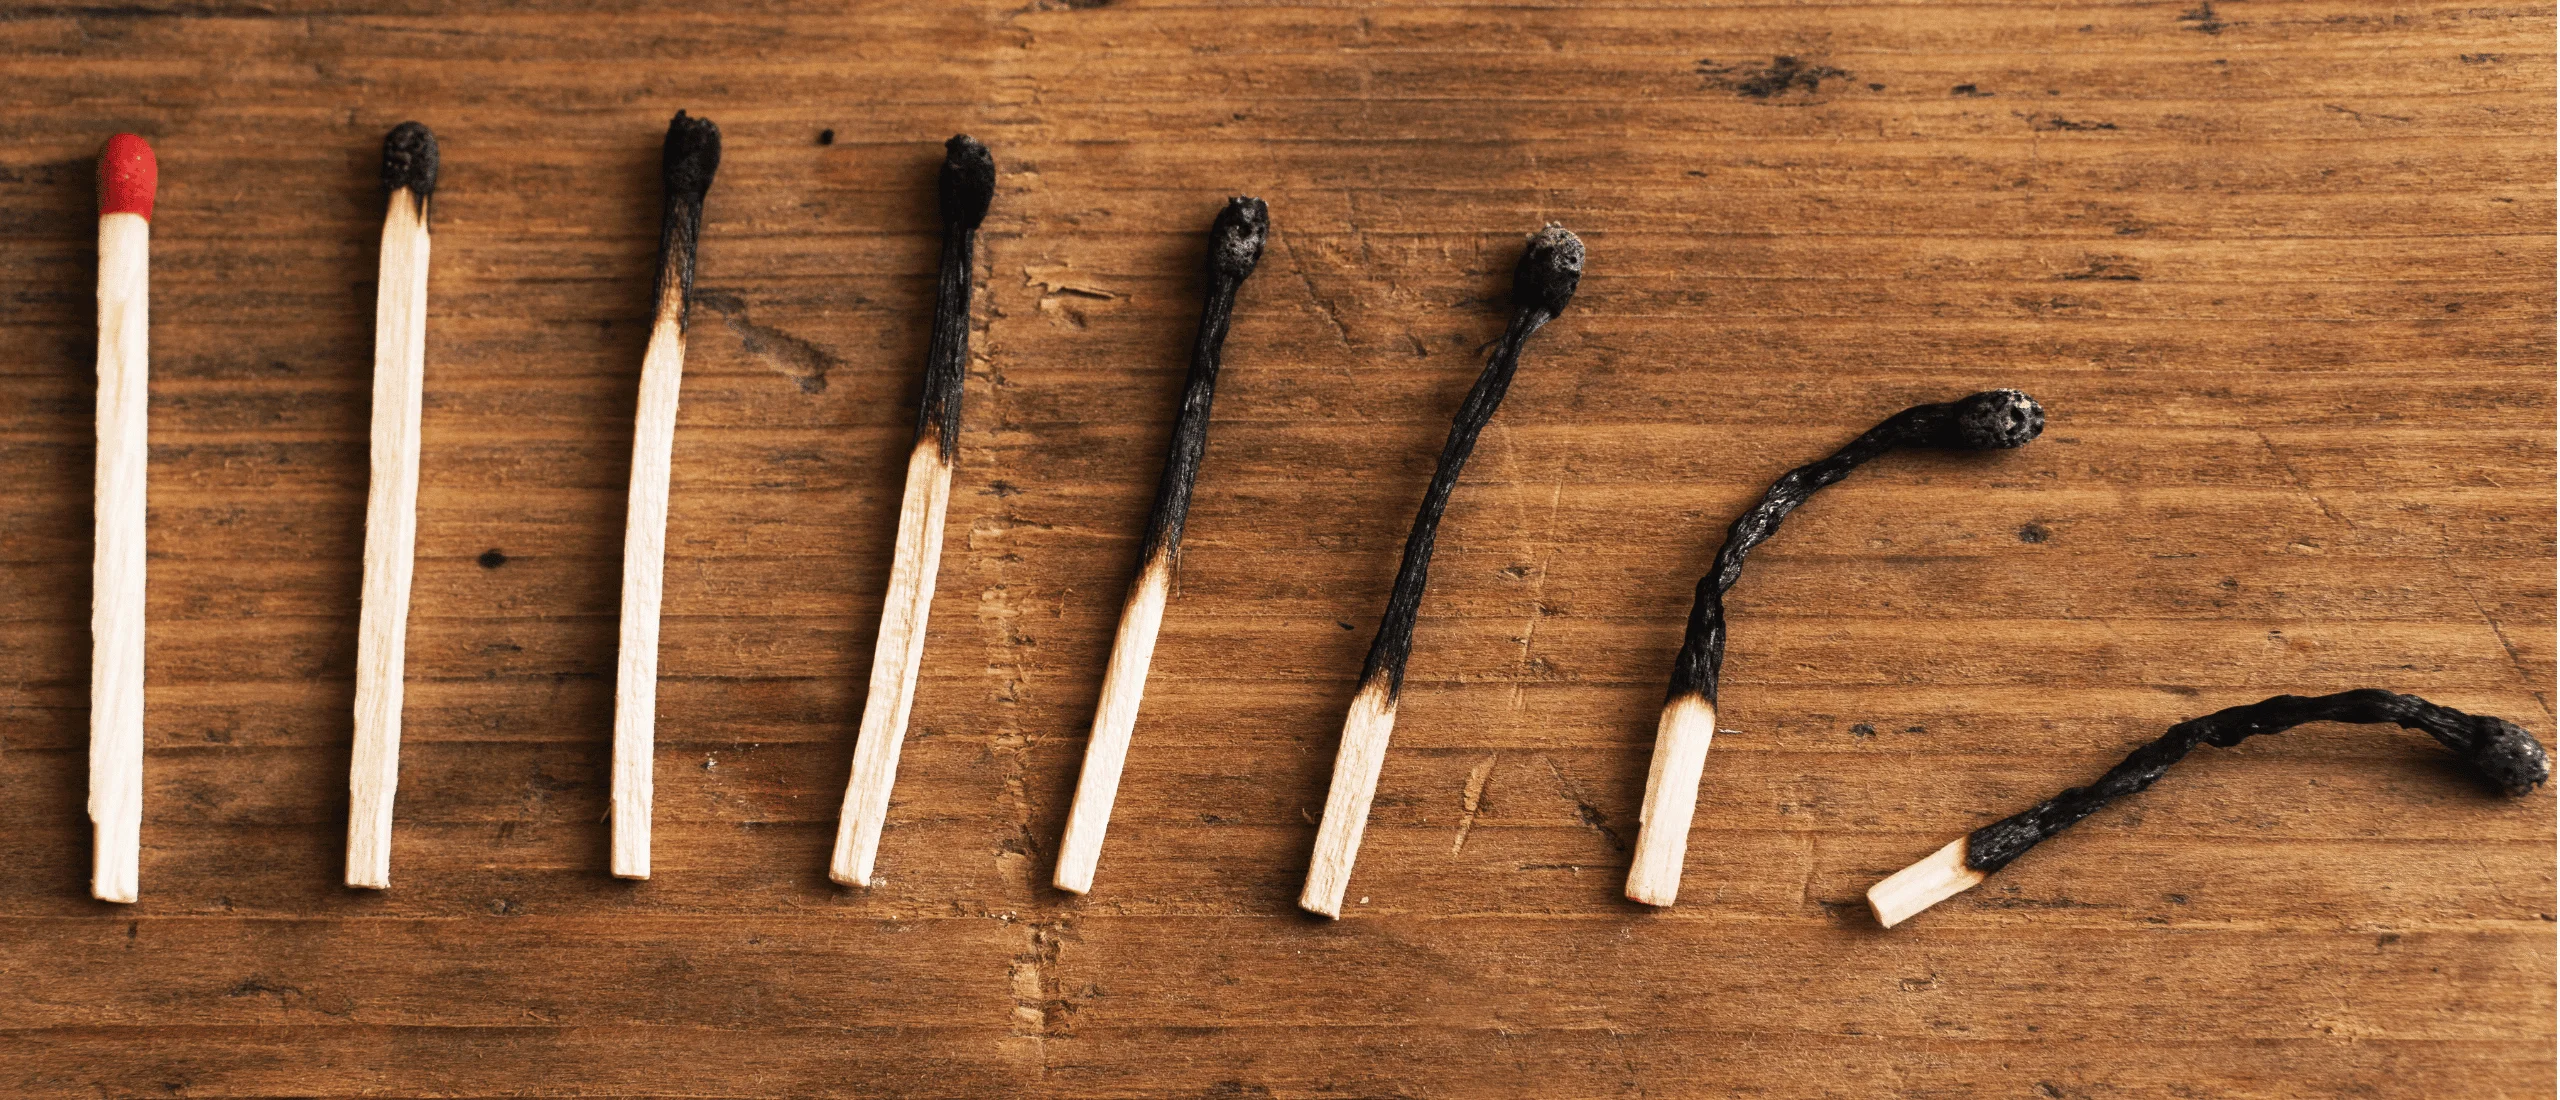 Matches in various stages of being burnt